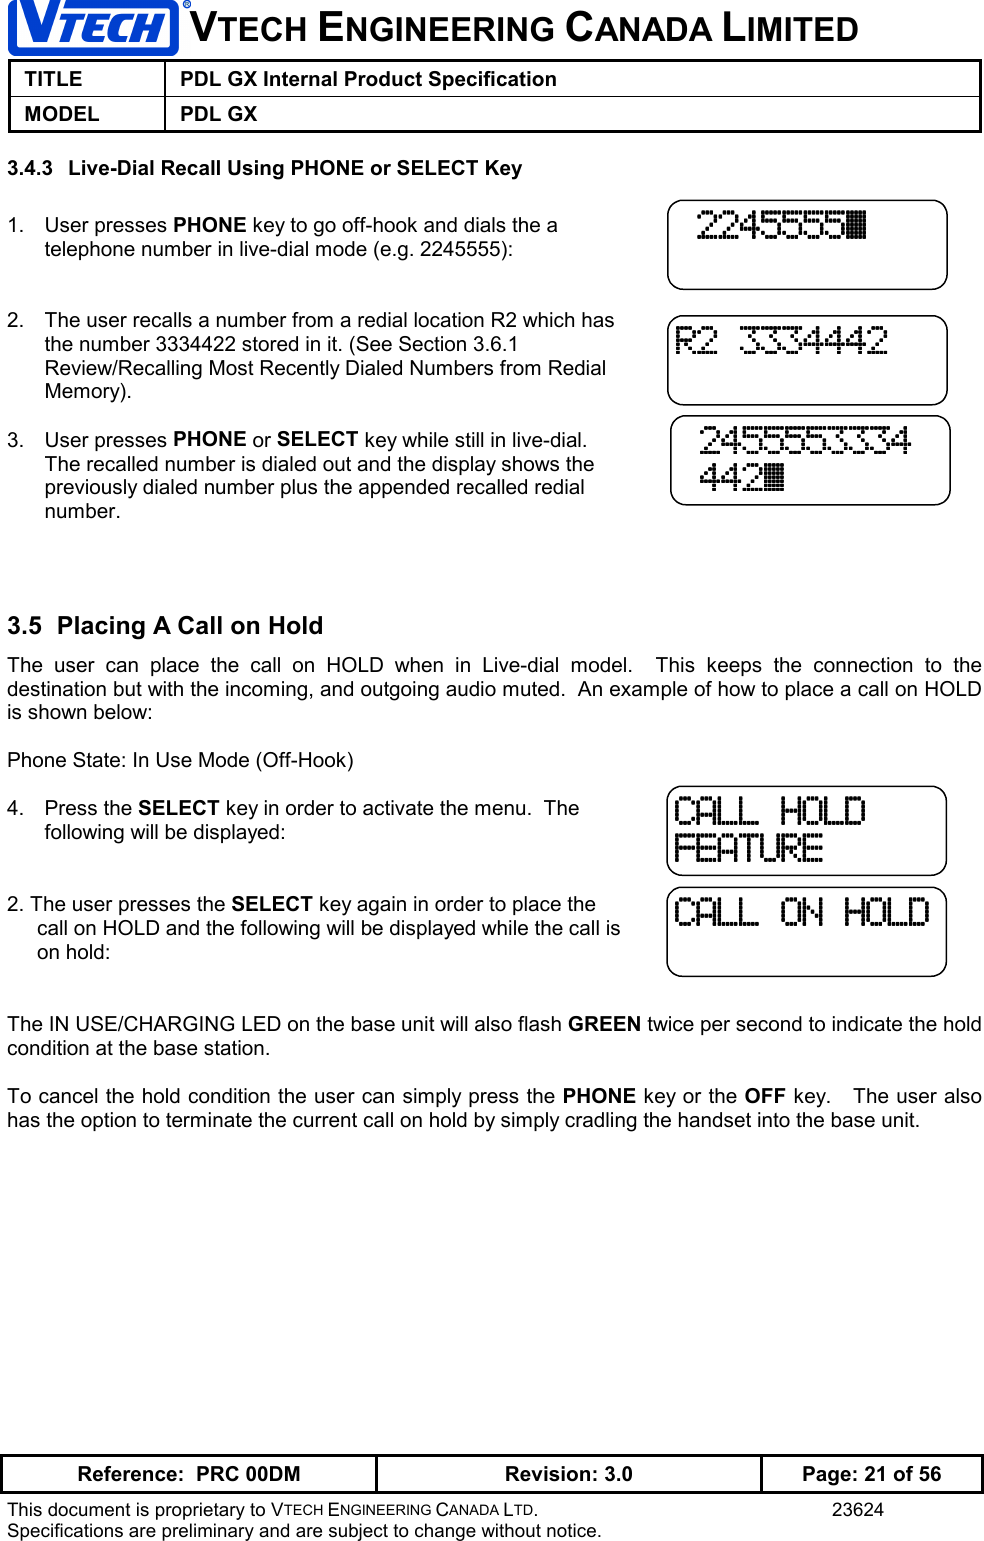 VTECH ENGINEERING CANADA LIMITEDTITLE PDL GX Internal Product SpecificationMODEL PDL GXReference:  PRC 00DM Revision: 3.0 Page: 21 of 56This document is proprietary to VTECH ENGINEERING CANADA LTD. 23624Specifications are preliminary and are subject to change without notice.3.4.3  Live-Dial Recall Using PHONE or SELECT Key1. User presses PHONE key to go off-hook and dials the atelephone number in live-dial mode (e.g. 2245555):2.  The user recalls a number from a redial location R2 which hasthe number 3334422 stored in it. (See Section 3.6.1Review/Recalling Most Recently Dialed Numbers from RedialMemory).3. User presses PHONE or SELECT key while still in live-dial.The recalled number is dialed out and the display shows thepreviously dialed number plus the appended recalled redialnumber.3.5  Placing A Call on HoldThe user can place the call on HOLD when in Live-dial model.  This keeps the connection to thedestination but with the incoming, and outgoing audio muted.  An example of how to place a call on HOLDis shown below:Phone State: In Use Mode (Off-Hook)4. Press the SELECT key in order to activate the menu.  Thefollowing will be displayed:2. The user presses the SELECT key again in order to place thecall on HOLD and the following will be displayed while the call ison hold:The IN USE/CHARGING LED on the base unit will also flash GREEN twice per second to indicate the holdcondition at the base station.To cancel the hold condition the user can simply press the PHONE key or the OFF key.   The user alsohas the option to terminate the current call on hold by simply cradling the handset into the base unit.CALL HOLDCALL HOLDCALL HOLDCALL HOLDFEATUREFEATUREFEATUREFEATURECALL ON HOLDCALL ON HOLDCALL ON HOLDCALL ON HOLDR2 3334442R2 3334442R2 3334442R2 3334442 2455553334 2455553334 2455553334 2455553334 442\ 442\ 442\ 442\ 2245555\ 2245555\ 2245555\ 2245555\